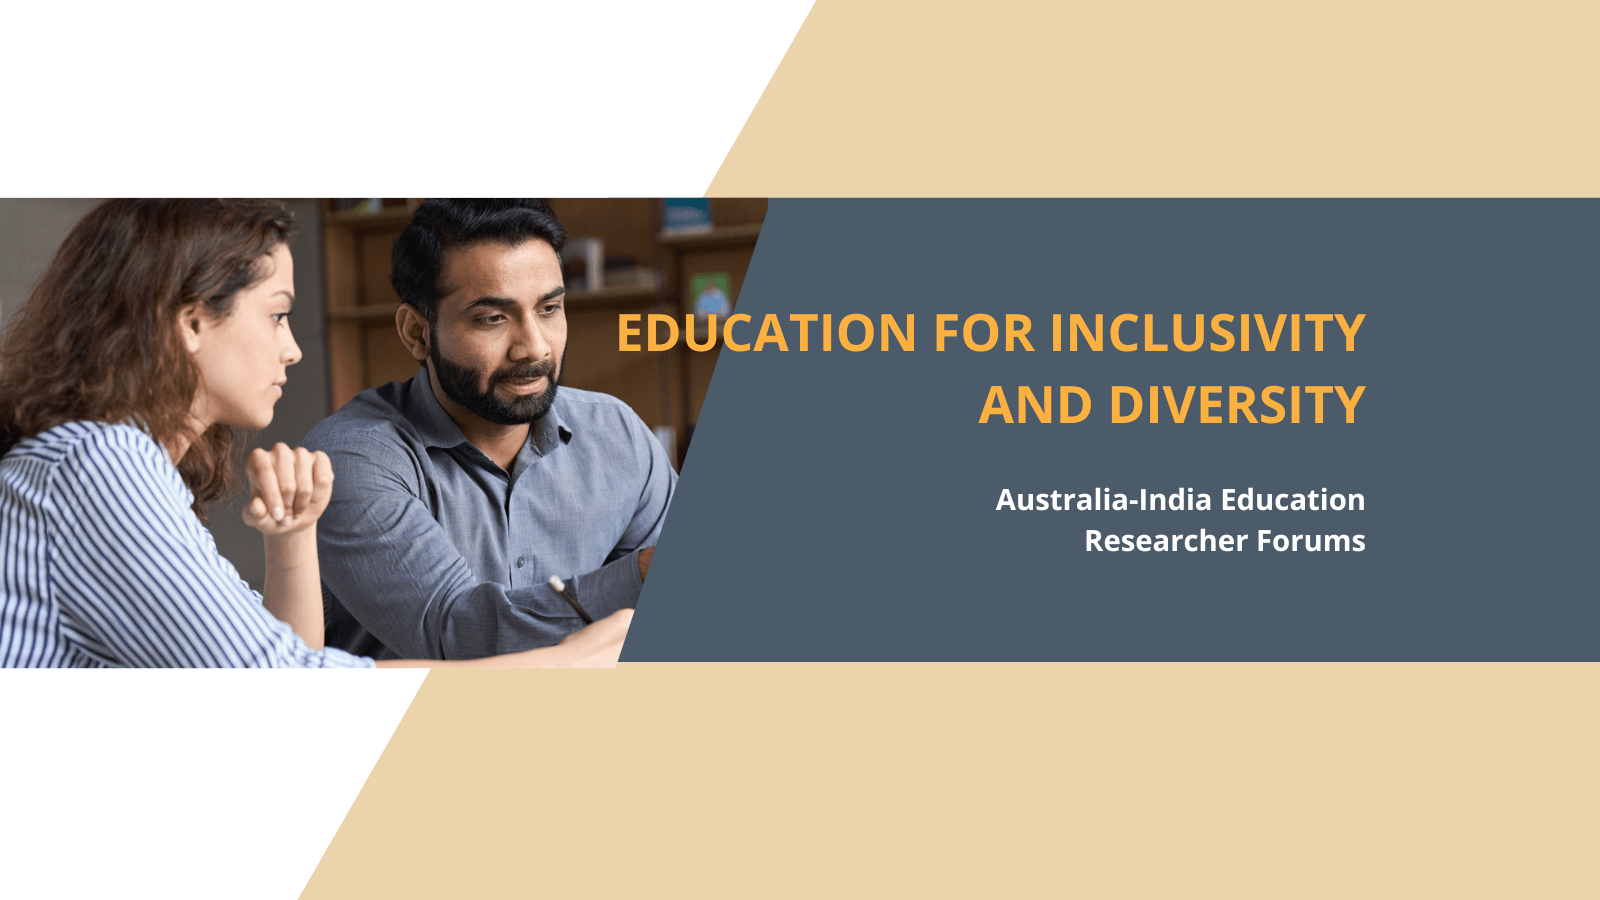 Education for inclusivity and diversity